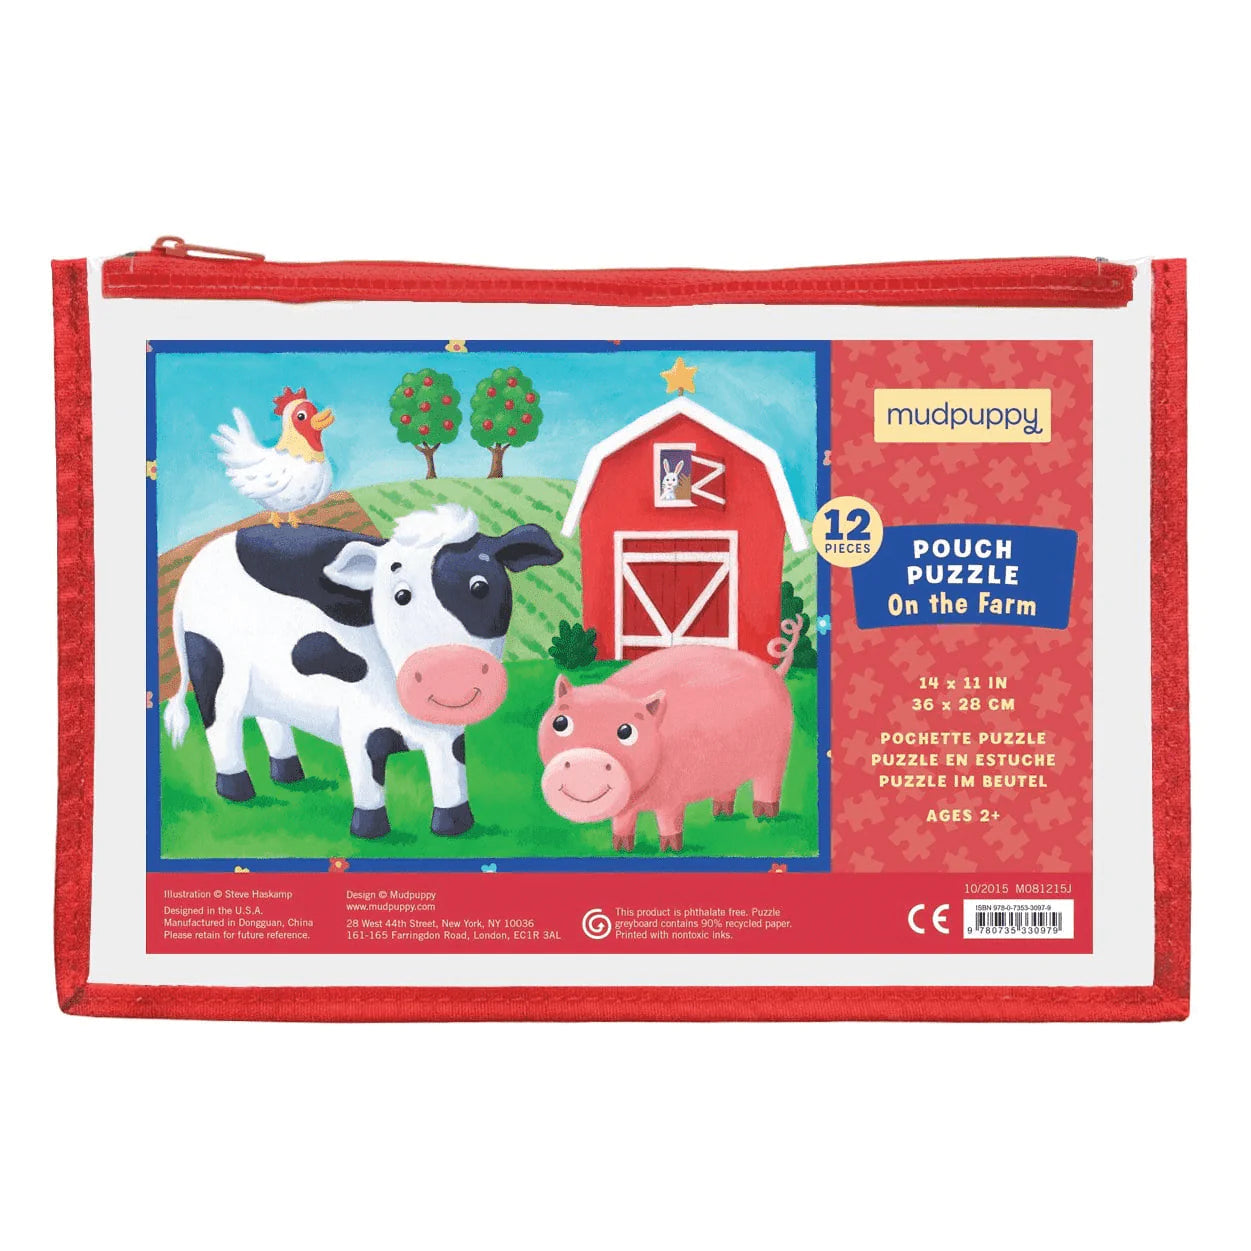 12-Piece Puzzle Pouch -- On the Farm by Mudpuppy